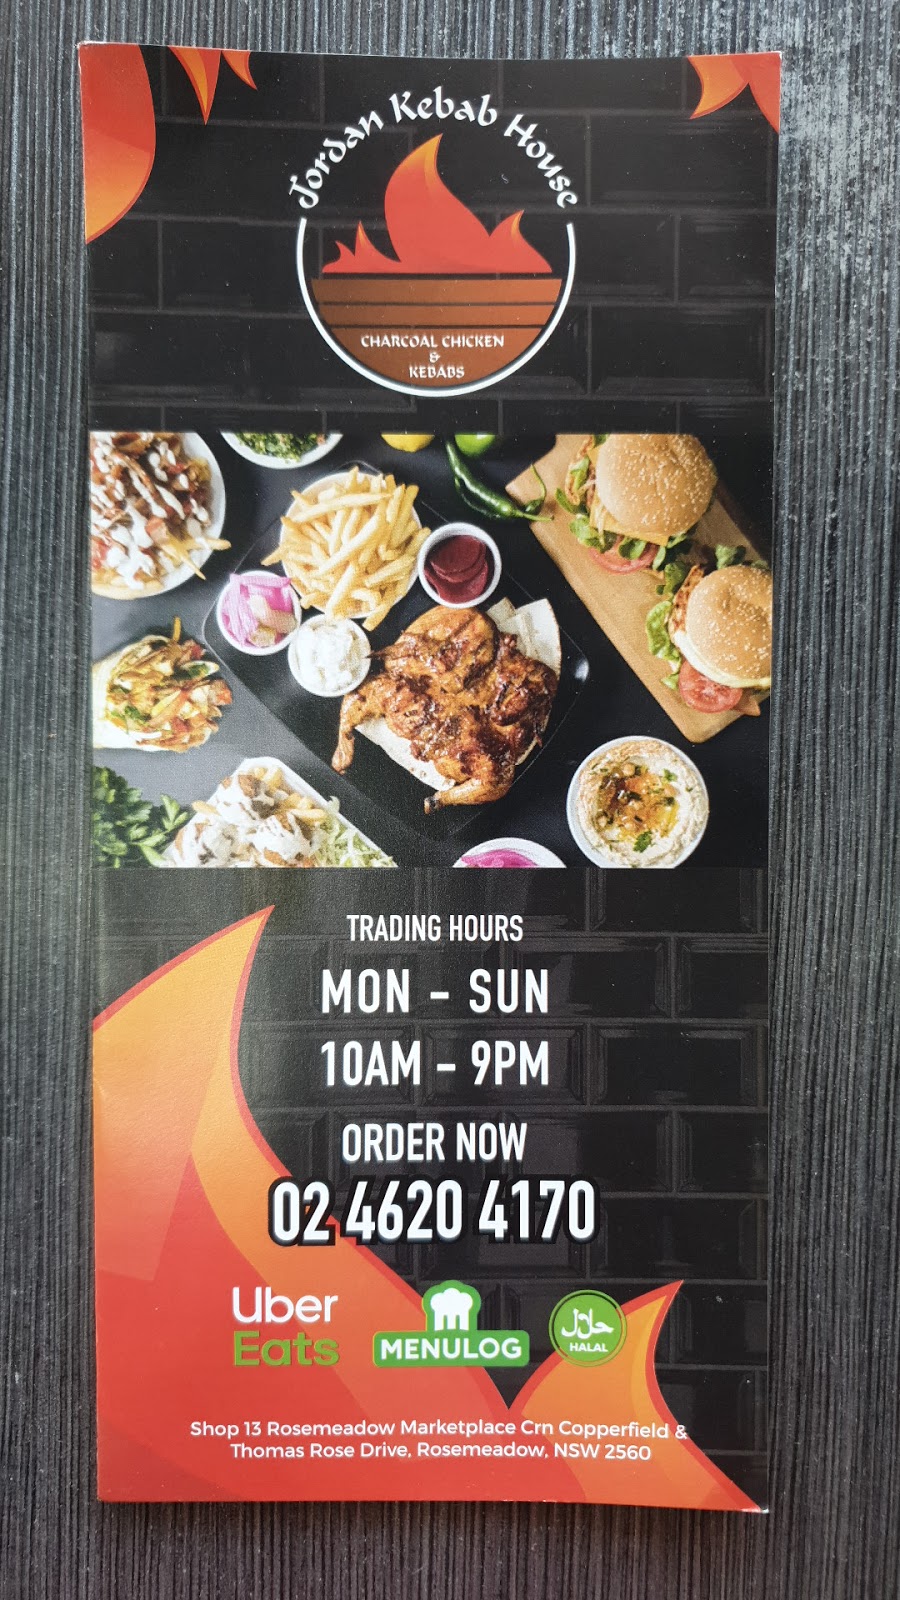 Jordan kebab house | restaurant | Shop 13, Crn of Thomas Rose Drive and, Marketplace, Copperfield Dr, Rosemeadow NSW 2560, Australia | 0246204170 OR +61 2 4620 4170